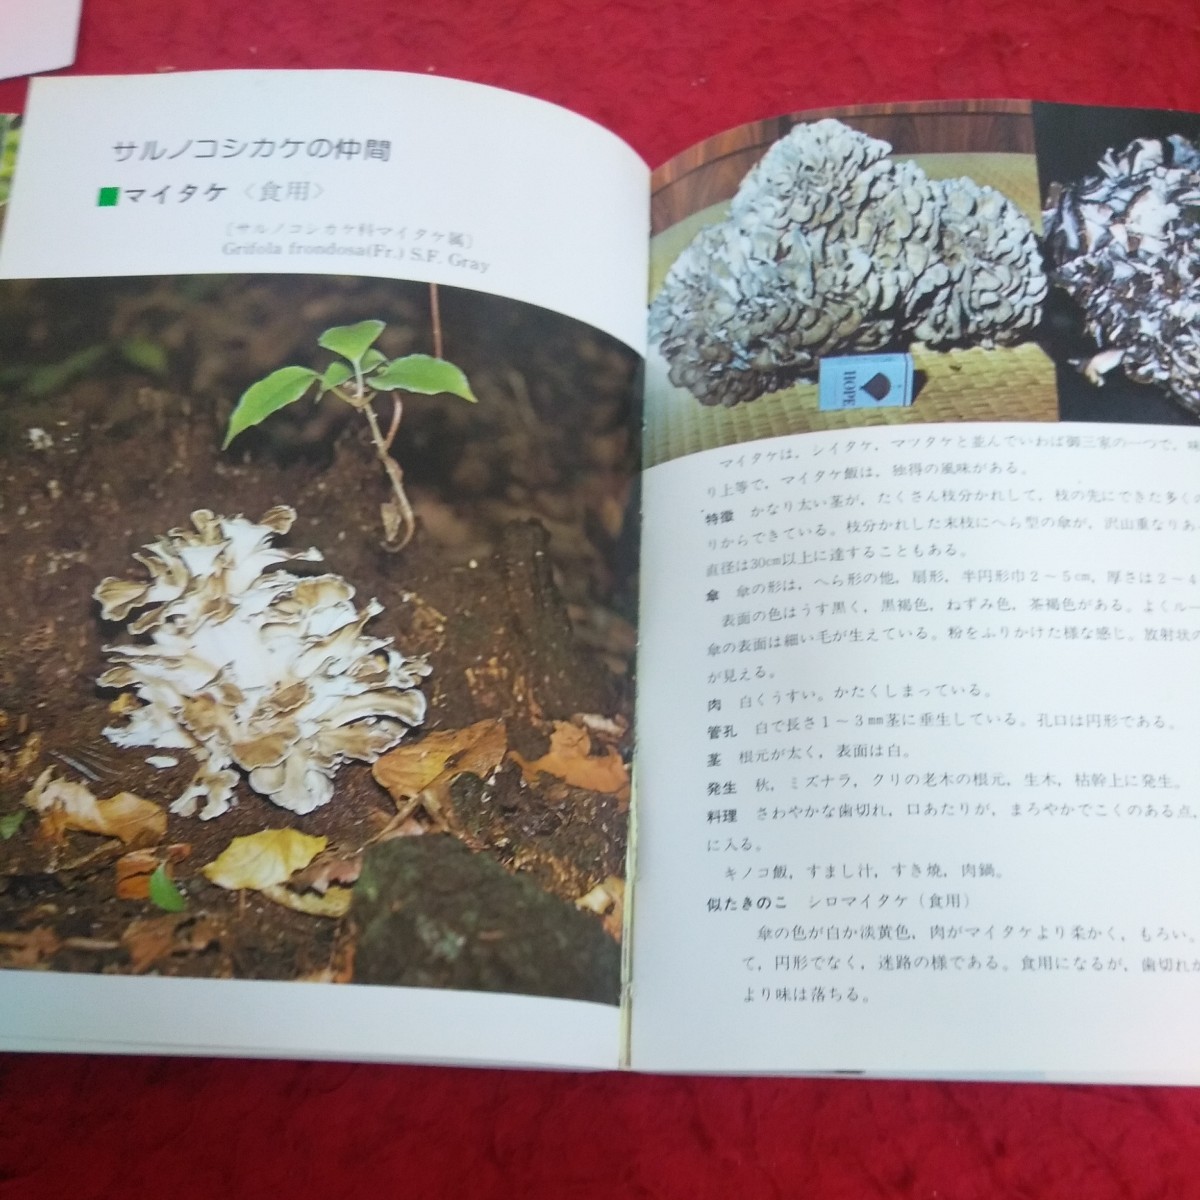 b-653. color Hokkaido. .. . illustrated reference book . peace rice field . male 1990 year issue meal ...... ., meal ... not .. . company etc. *1